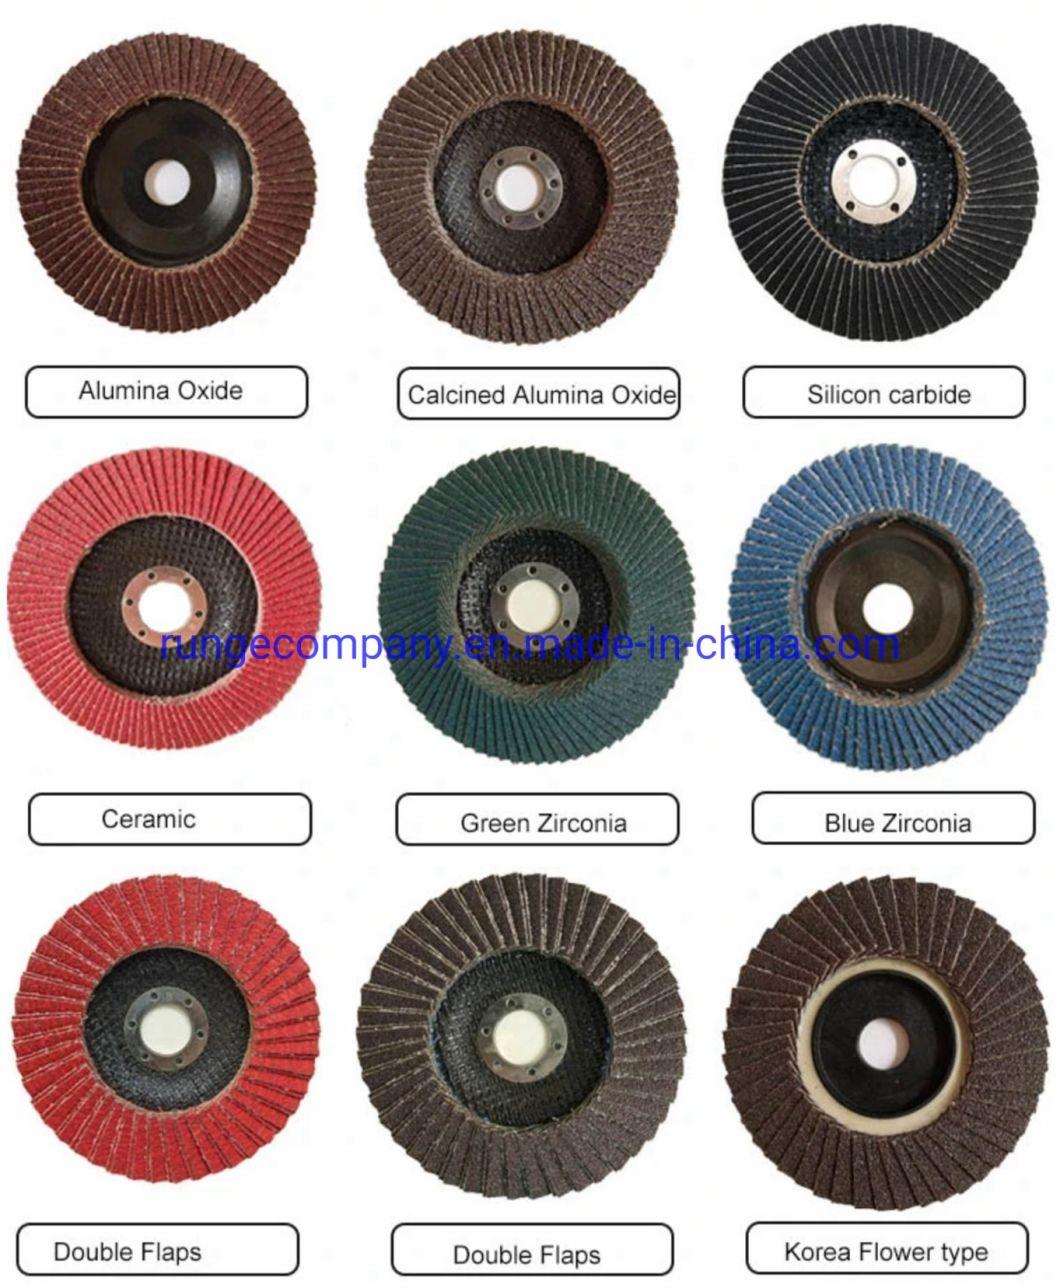 Power Tool Cut off Wheels 7" Inch Cutting Disc for Angle Grinder Cutting Metal/Stainless Steel Aluminum Wood Stone